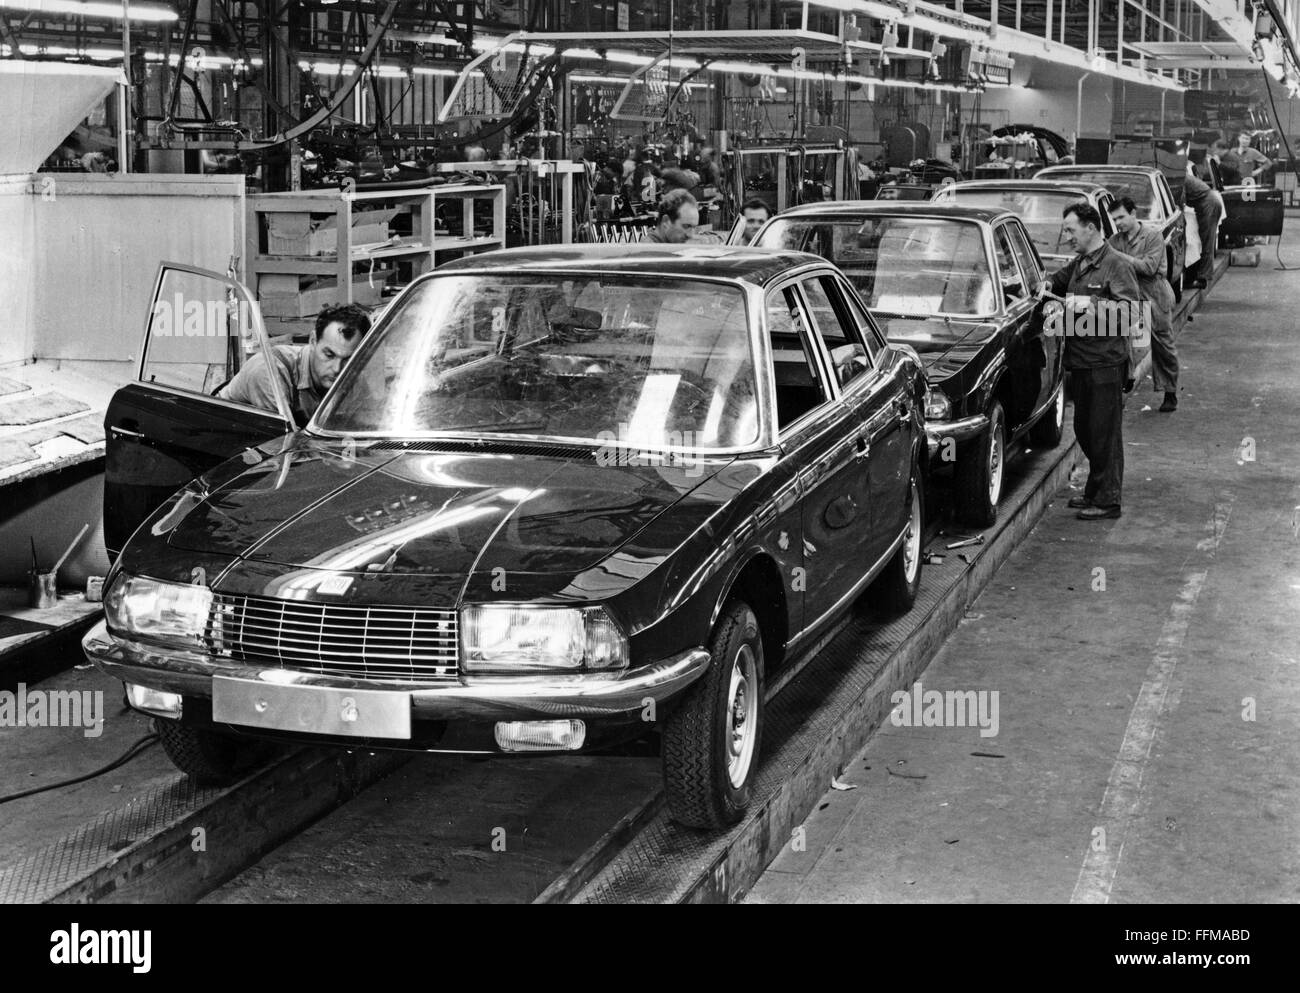 industry,car industry,production of the NSU Ro 80,Neckarsulm,1967,Germany,factory building,factory buildings,manufactory,manufactories,hall,halls,assembly line,production line,assembly lines,production lines,limousine,worker,workers,works,working,work,labouring,laboring,labour,labor,Wankel engine,Wankel rotary engine,Wankel engines,Wankel rotary engines,Wankel,Ro80,fabrication,building,production,manufacture,foundry,production plant,manufacturing plant,factories,foundries,production plants,manufacturing plants,company,,Additional-Rights-Clearences-Not Available Stock Photo